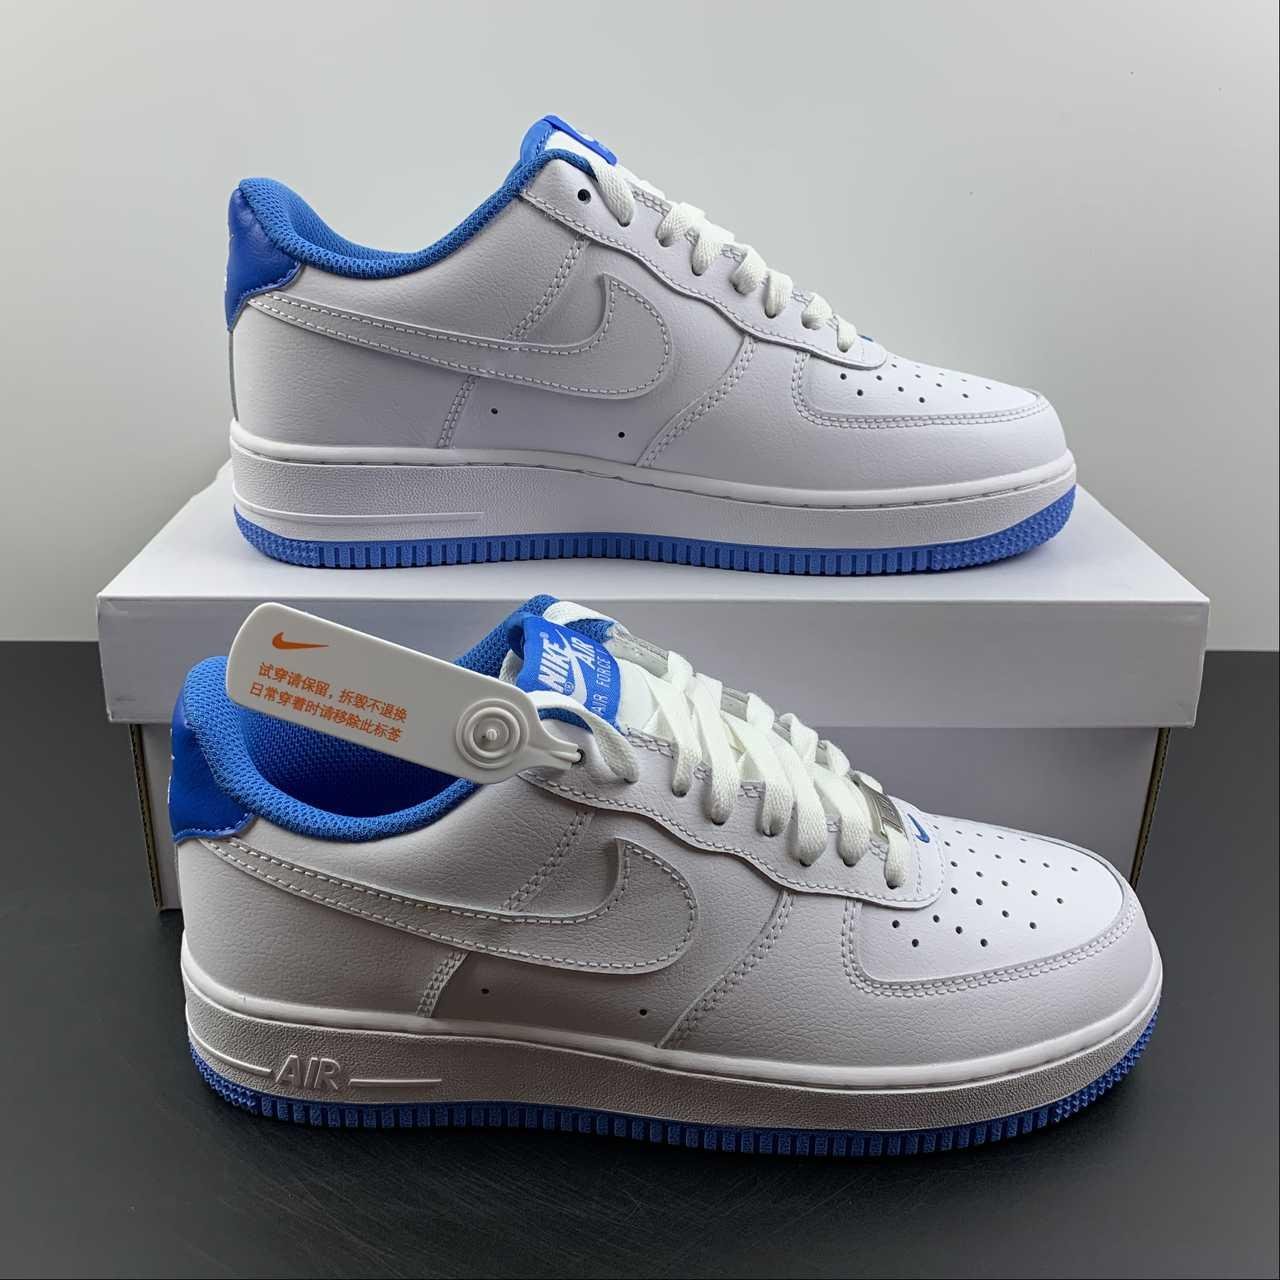      AIR FORCE 1  WHITE BLUE low-top casual  shoes DR9867-101   